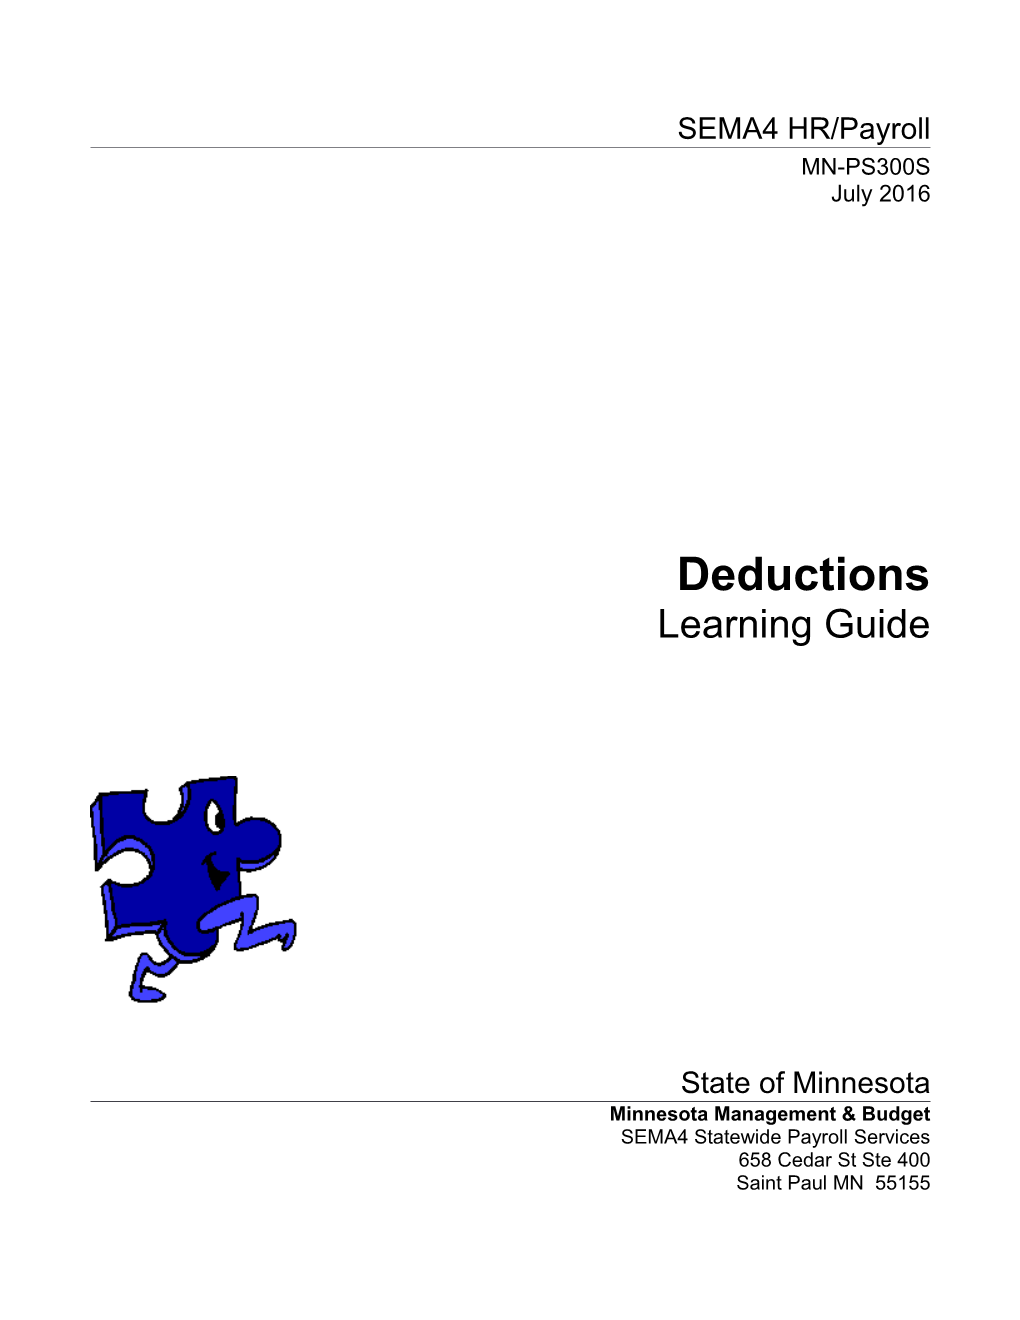 Learning Guide: Deductions